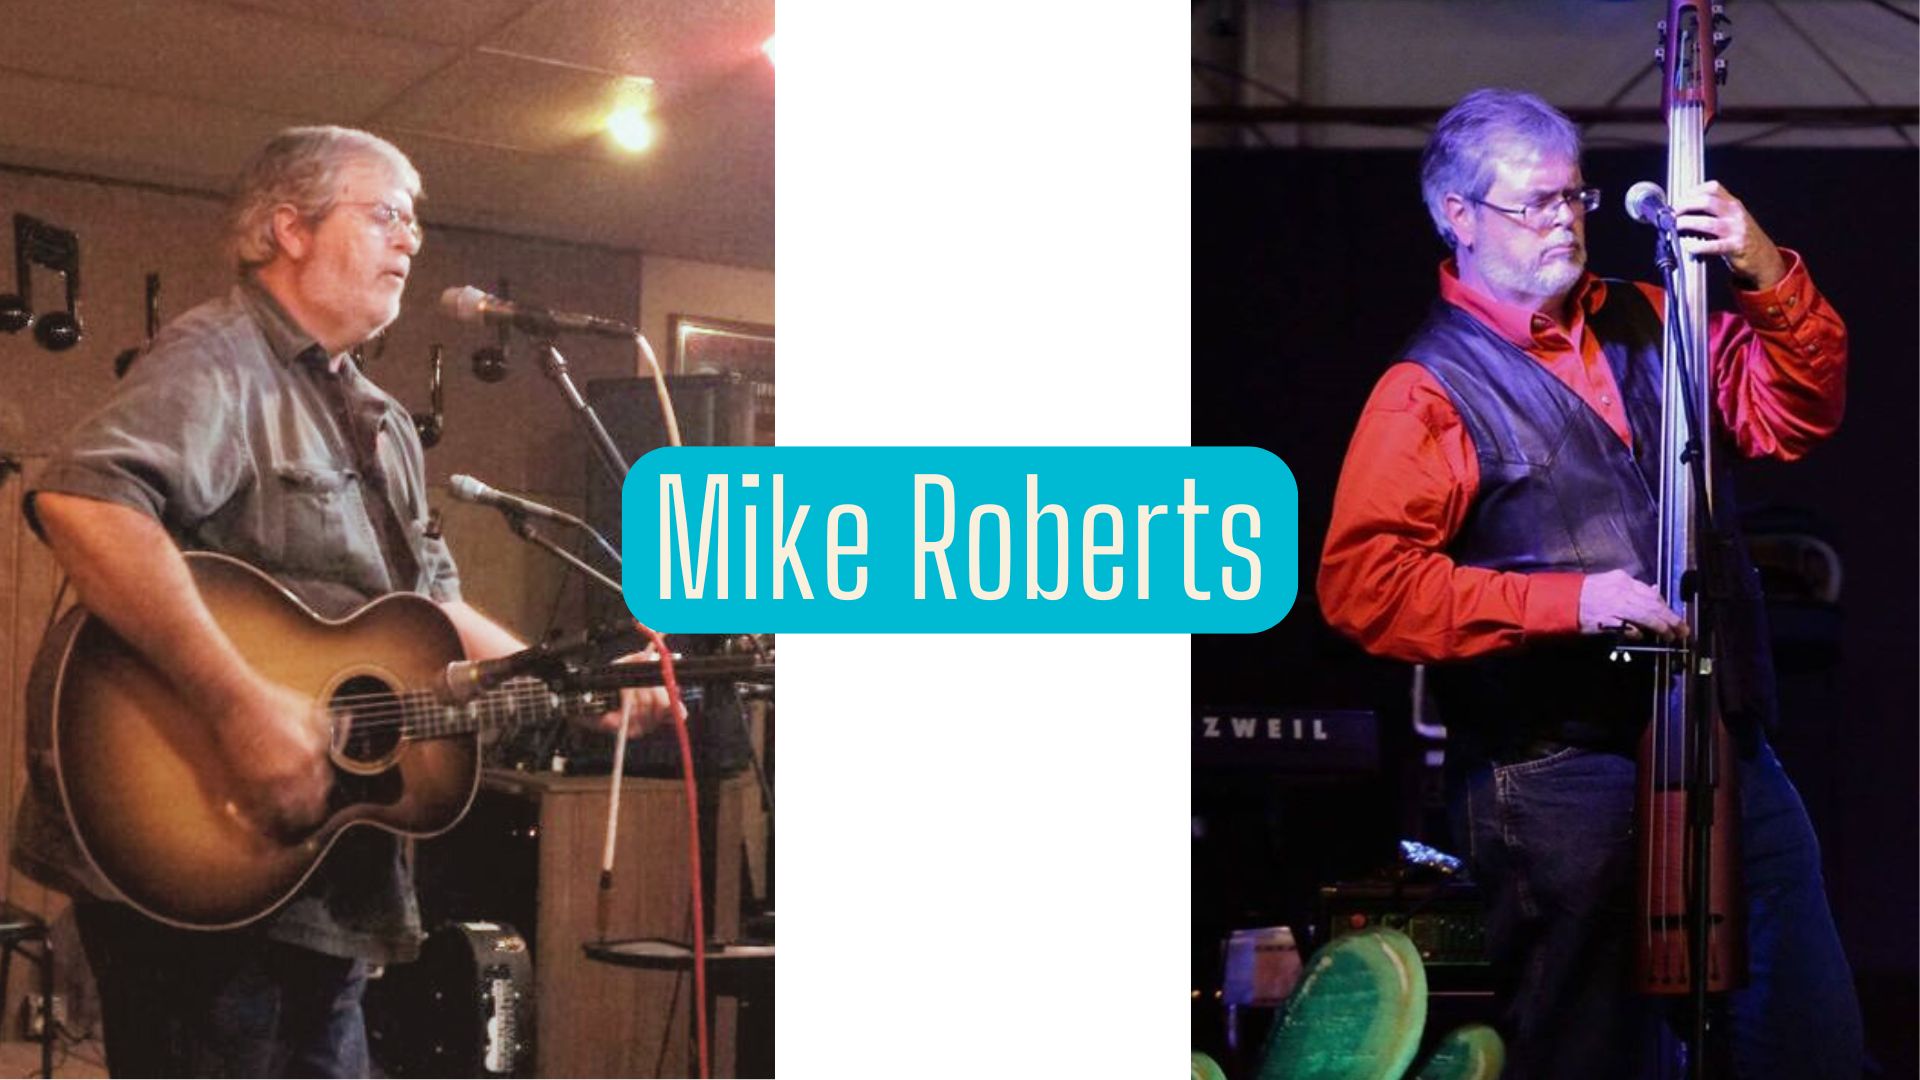 Live Music with Mike Roberts